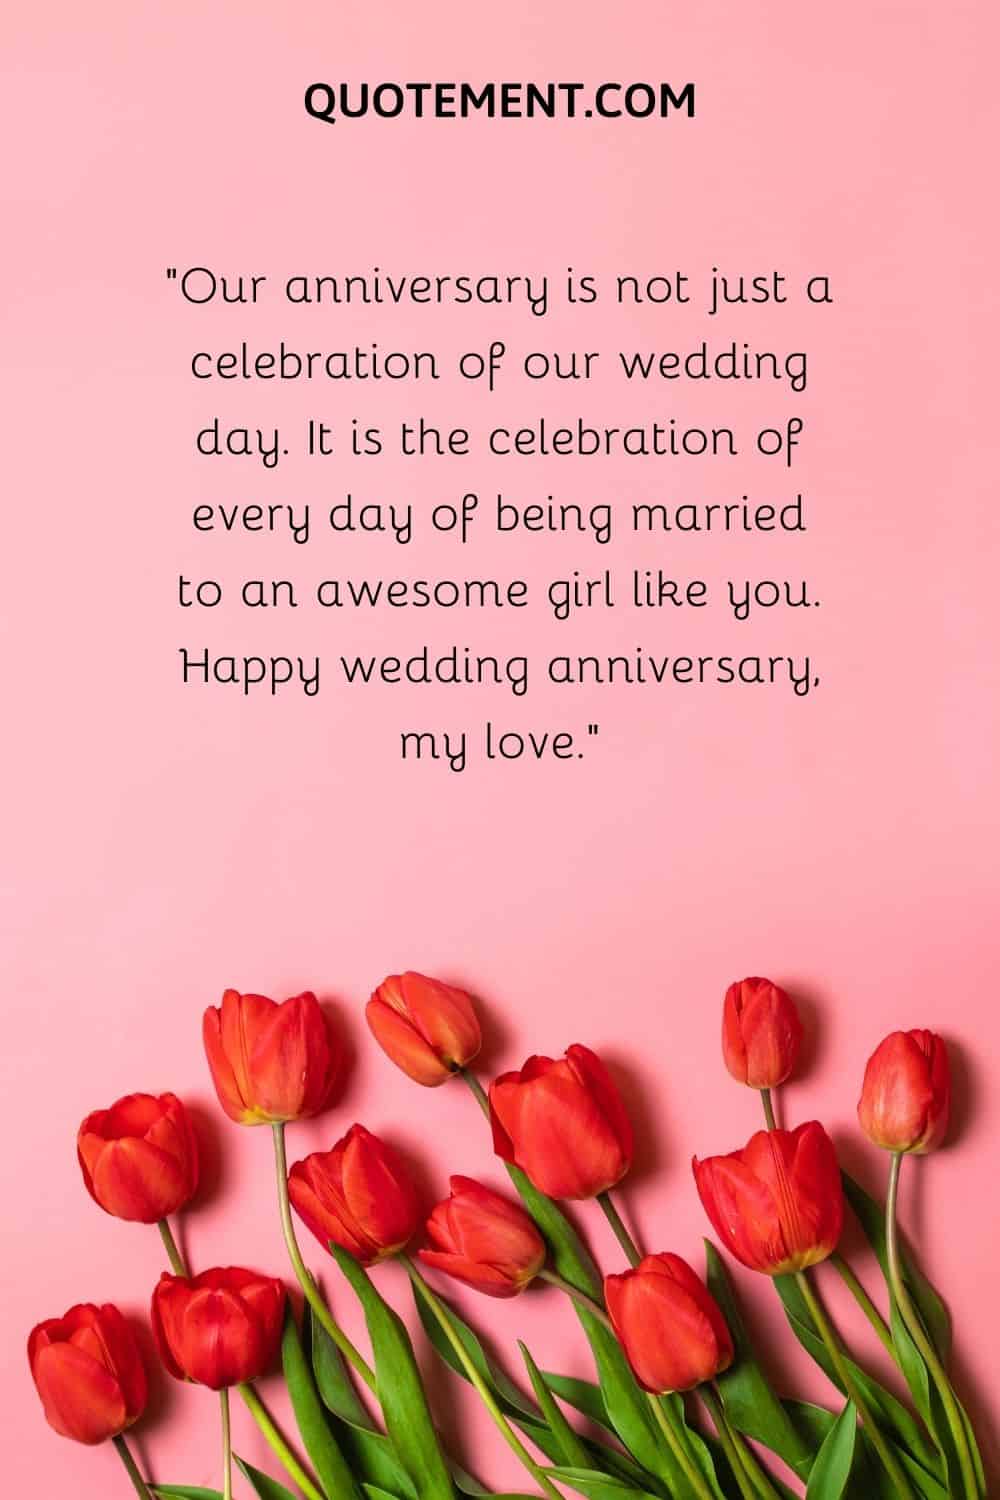 Our anniversary is not just a celebration of our wedding day.